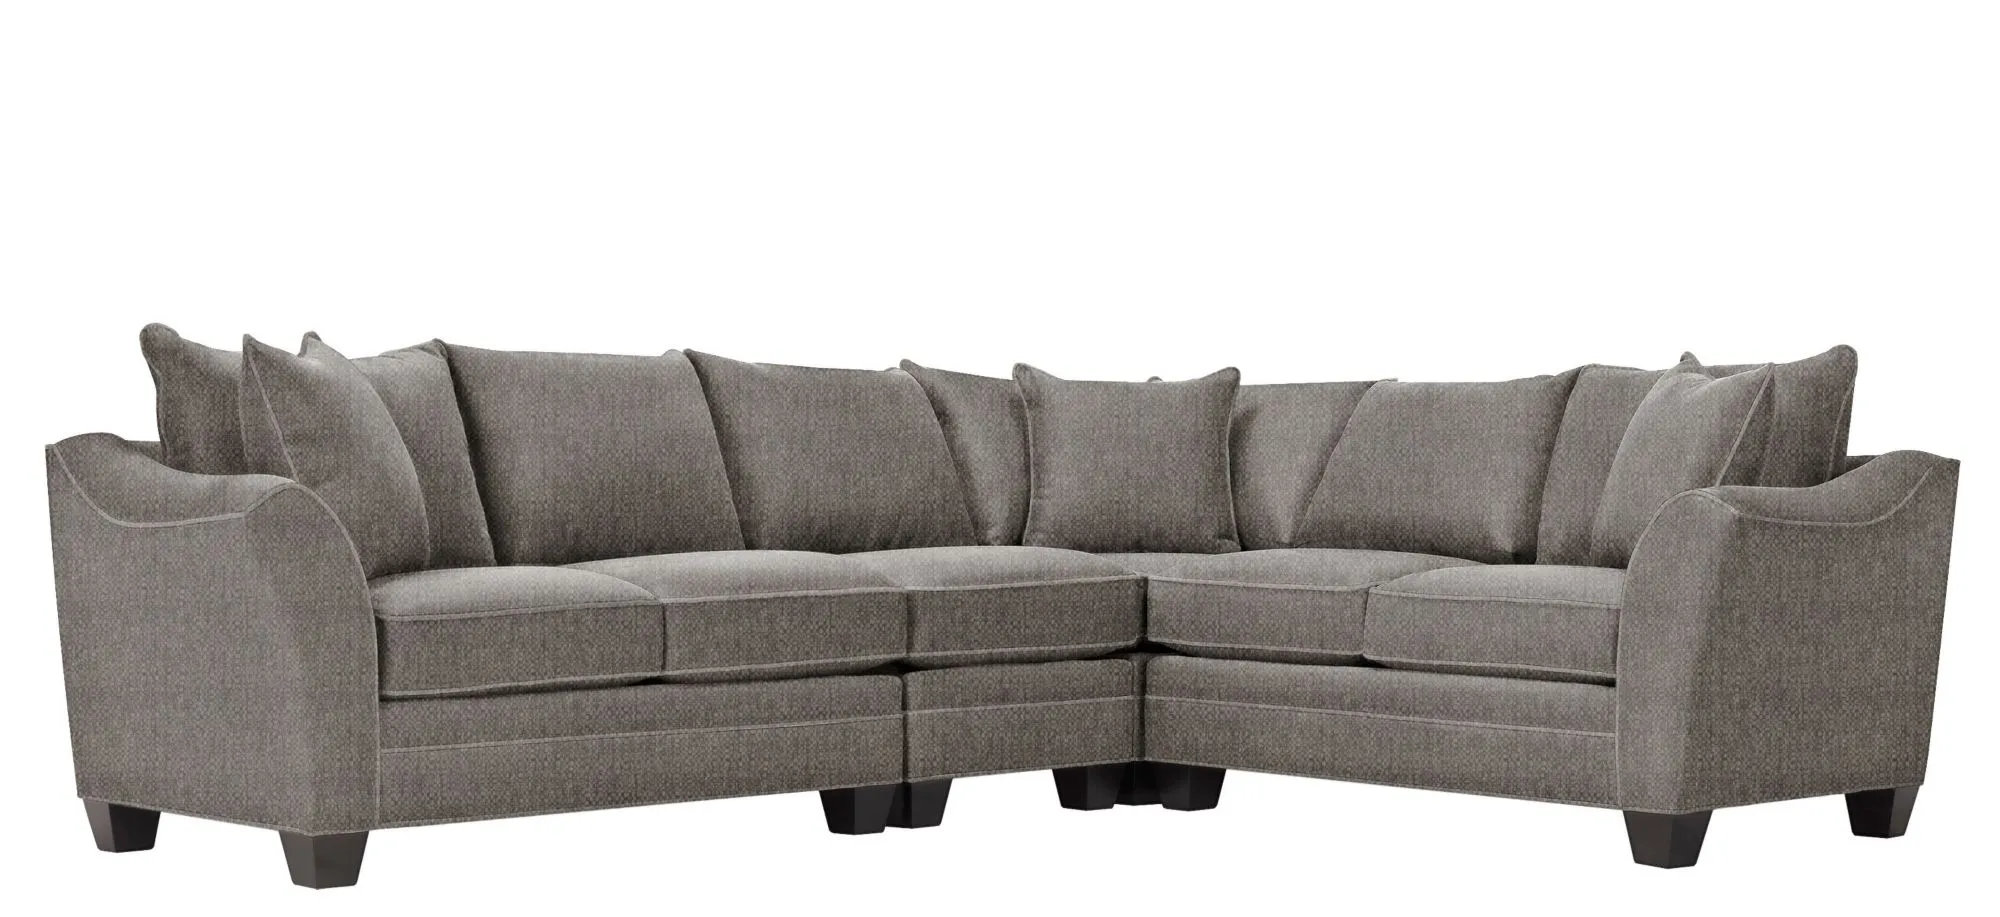 Foresthill 4-pc. Loveseat Sectional Sofa in Sugar Shack Stone by H.M. Richards